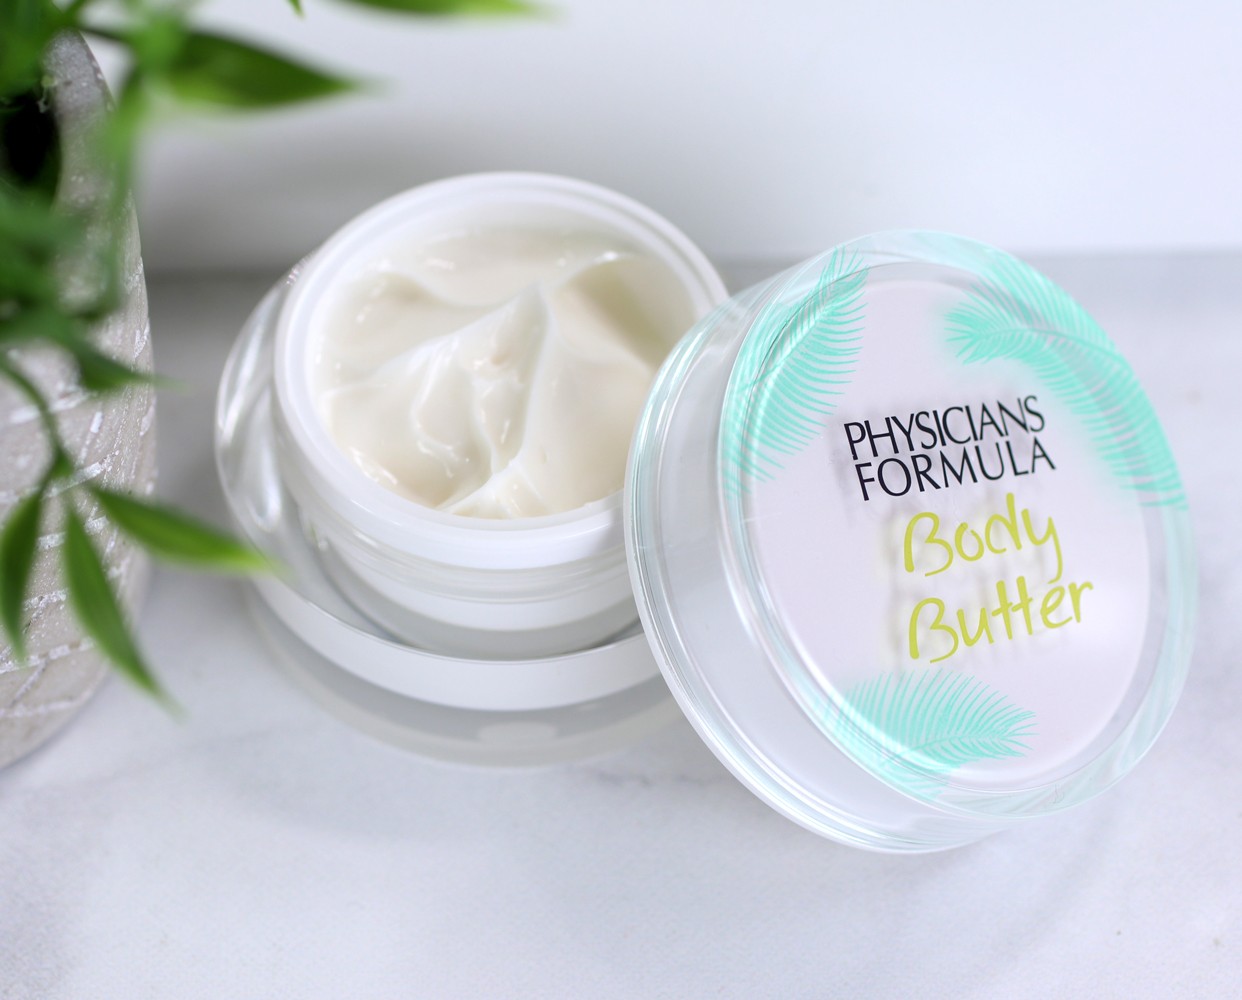 Physicians Formula Body Butter from the Limited Edition Butter Collection at Ulta